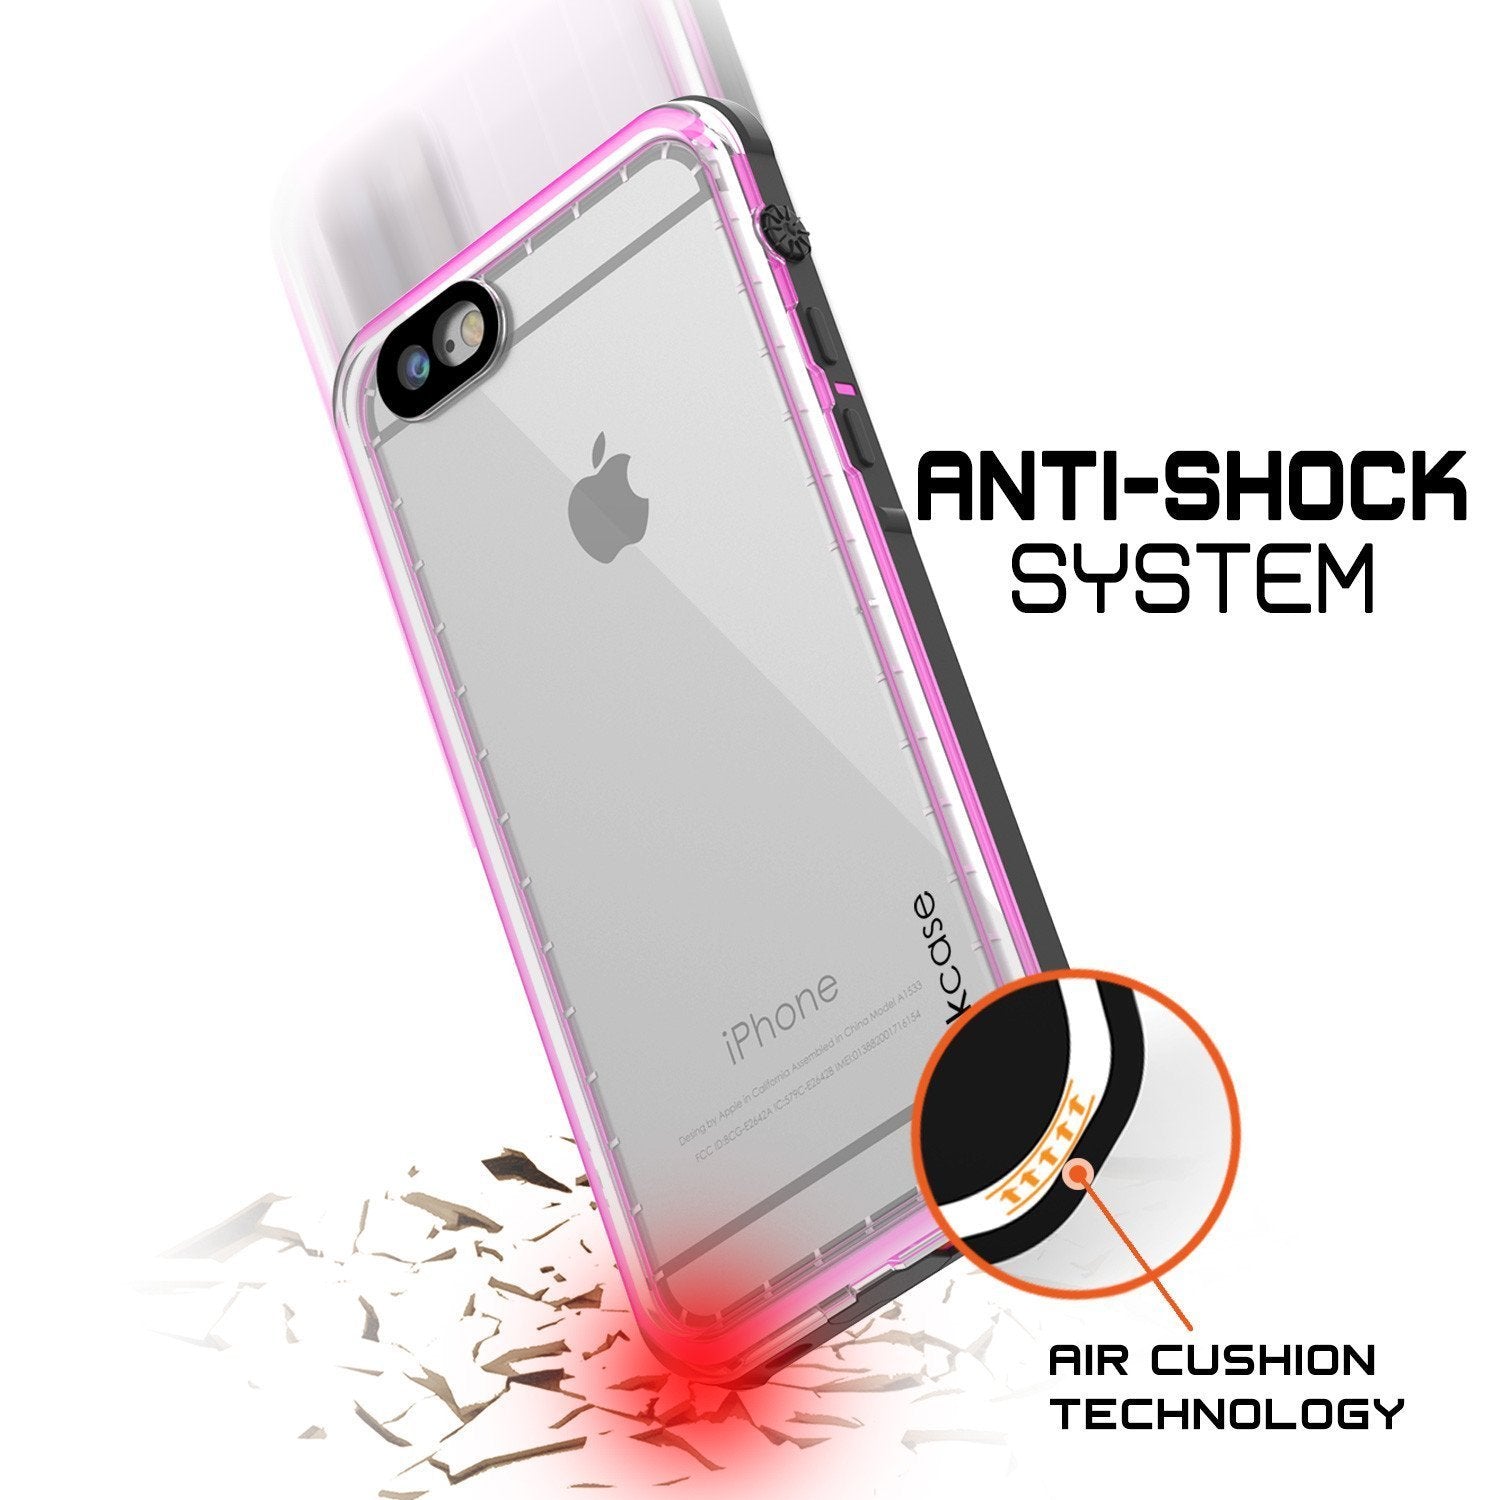 Apple iPhone 8 Waterproof Case, PUNKcase CRYSTAL Pink W/ Attached Screen Protector  | Warranty